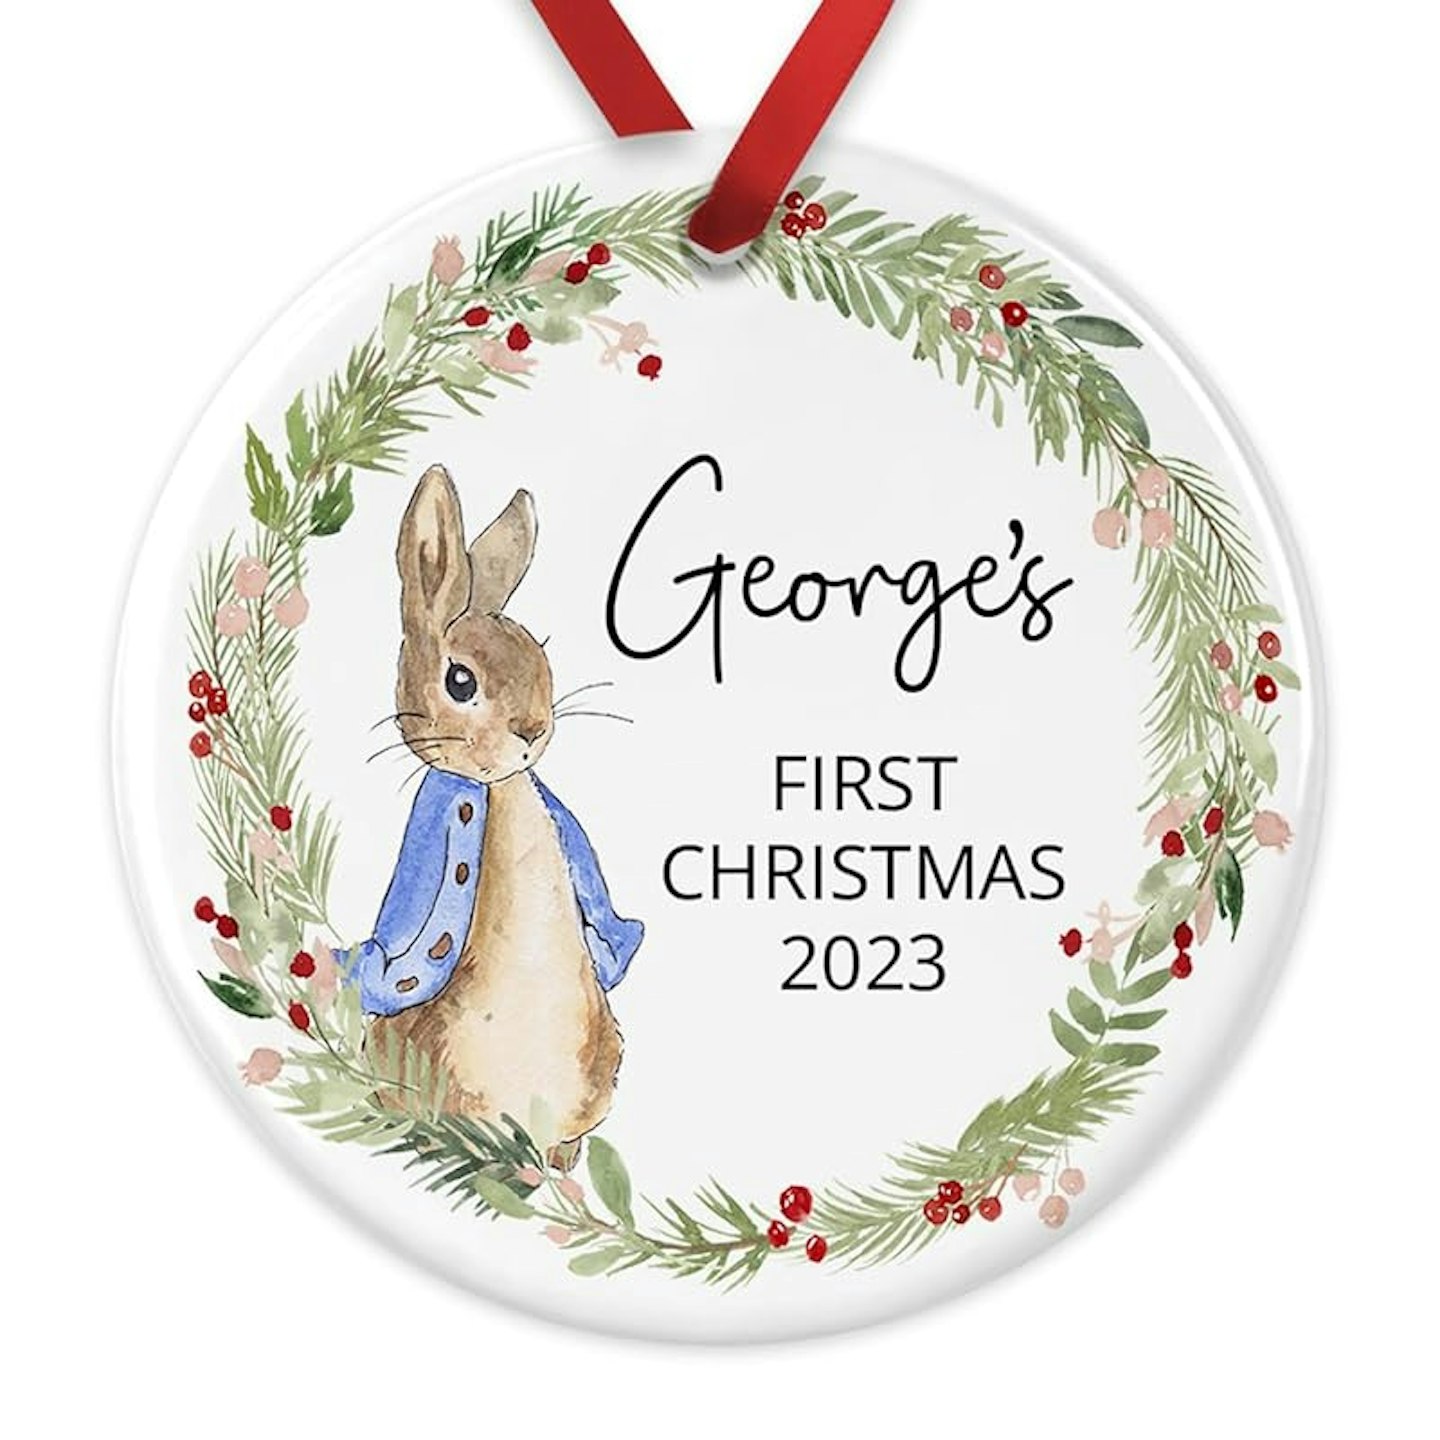 Peter Rabbit - first Christmas bauble